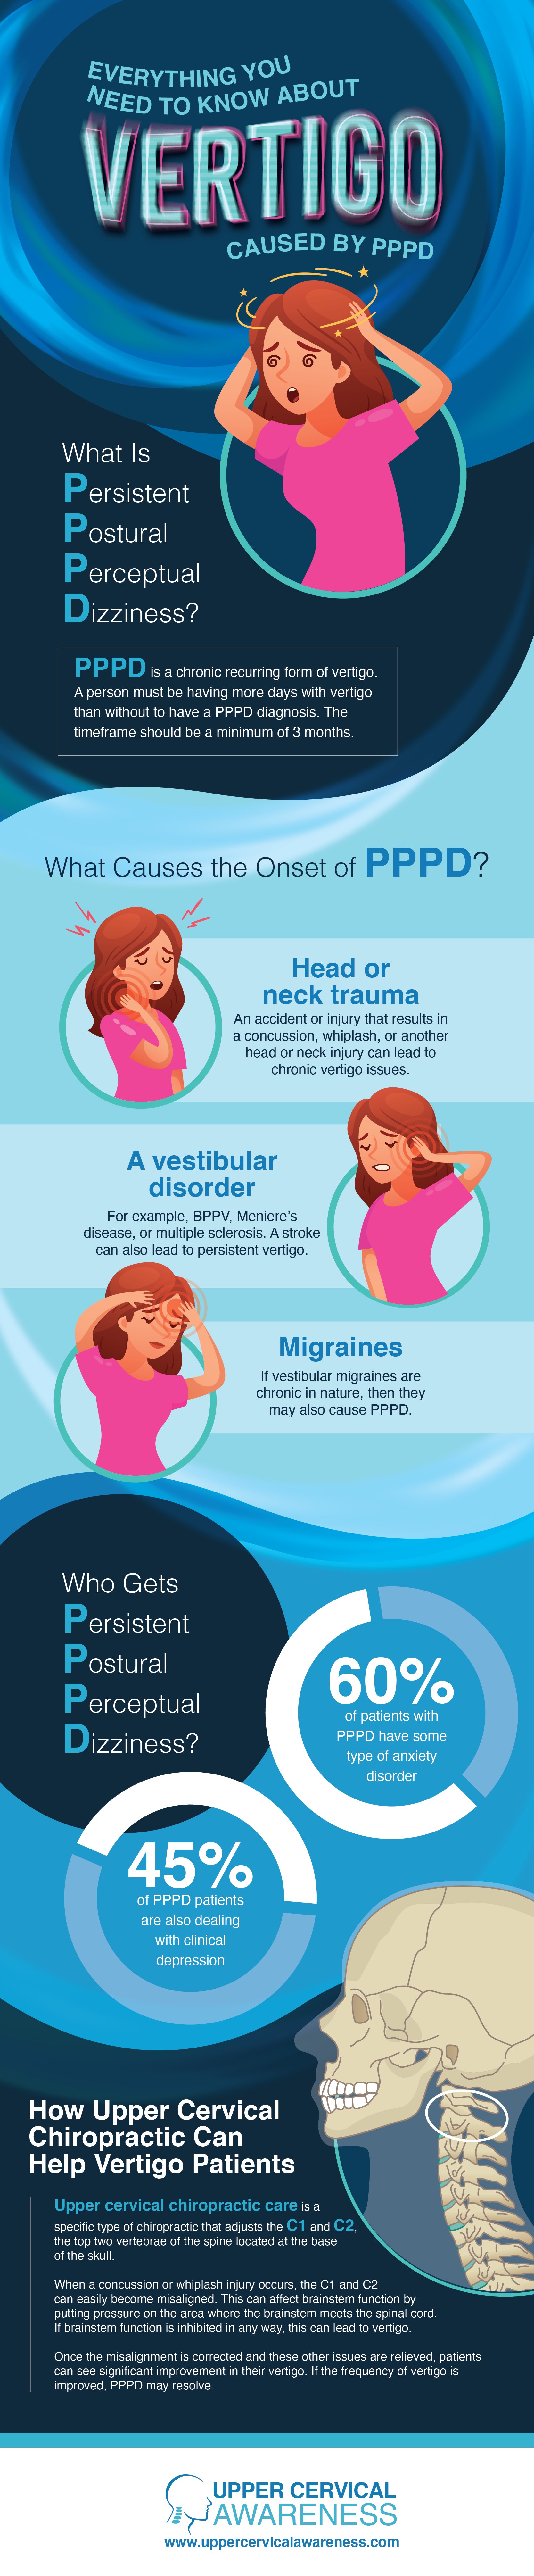 Everything You Need to Know About Vertigo Caused by PPPD